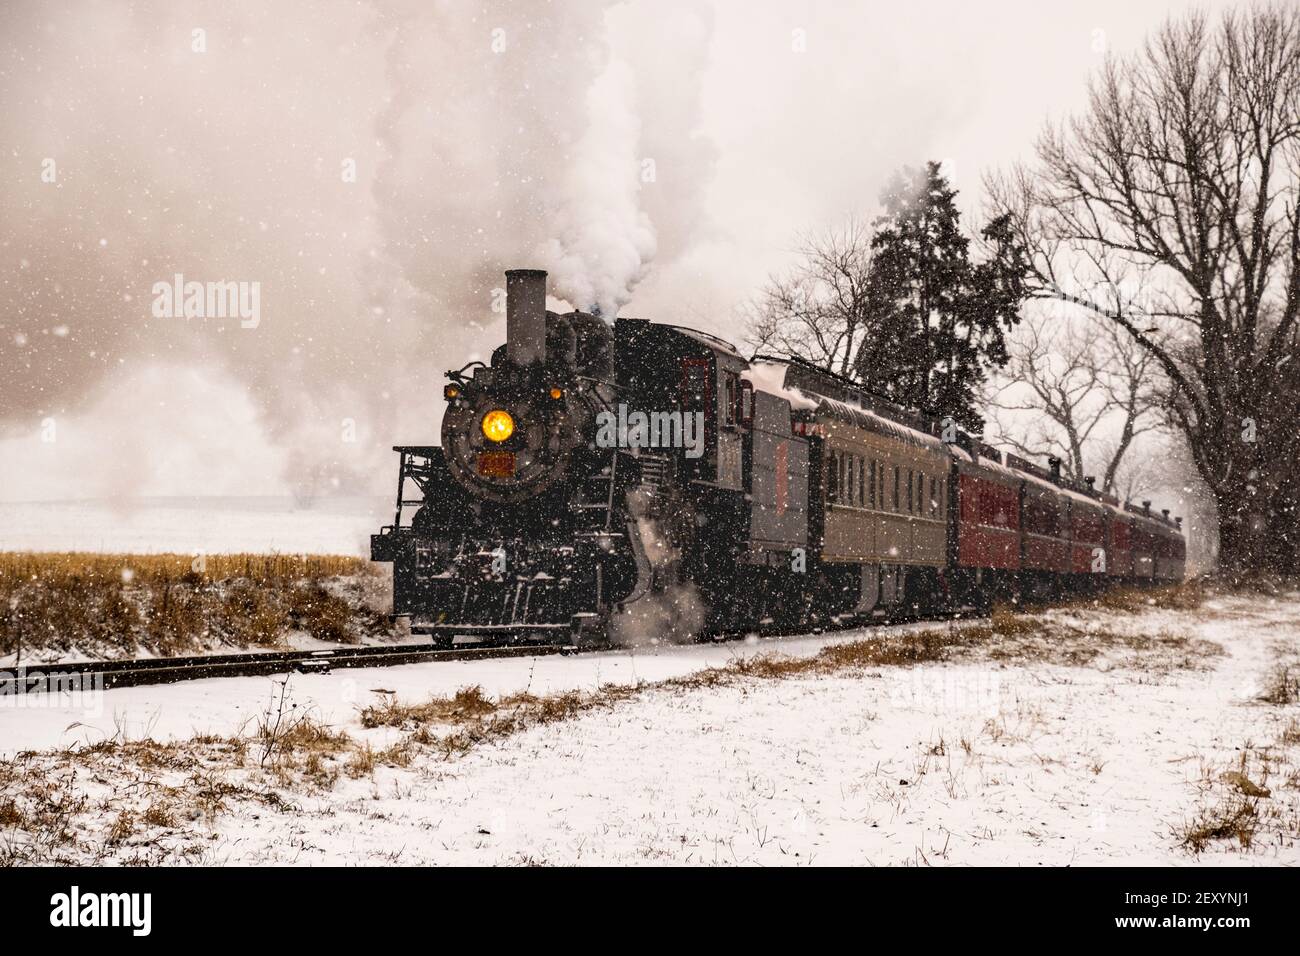 View of An Antique Restored Steam Locomotive Blowing Smoke and Steam Traveling Thru Farmlands and Countryside in a Snow Storm Stock Photo